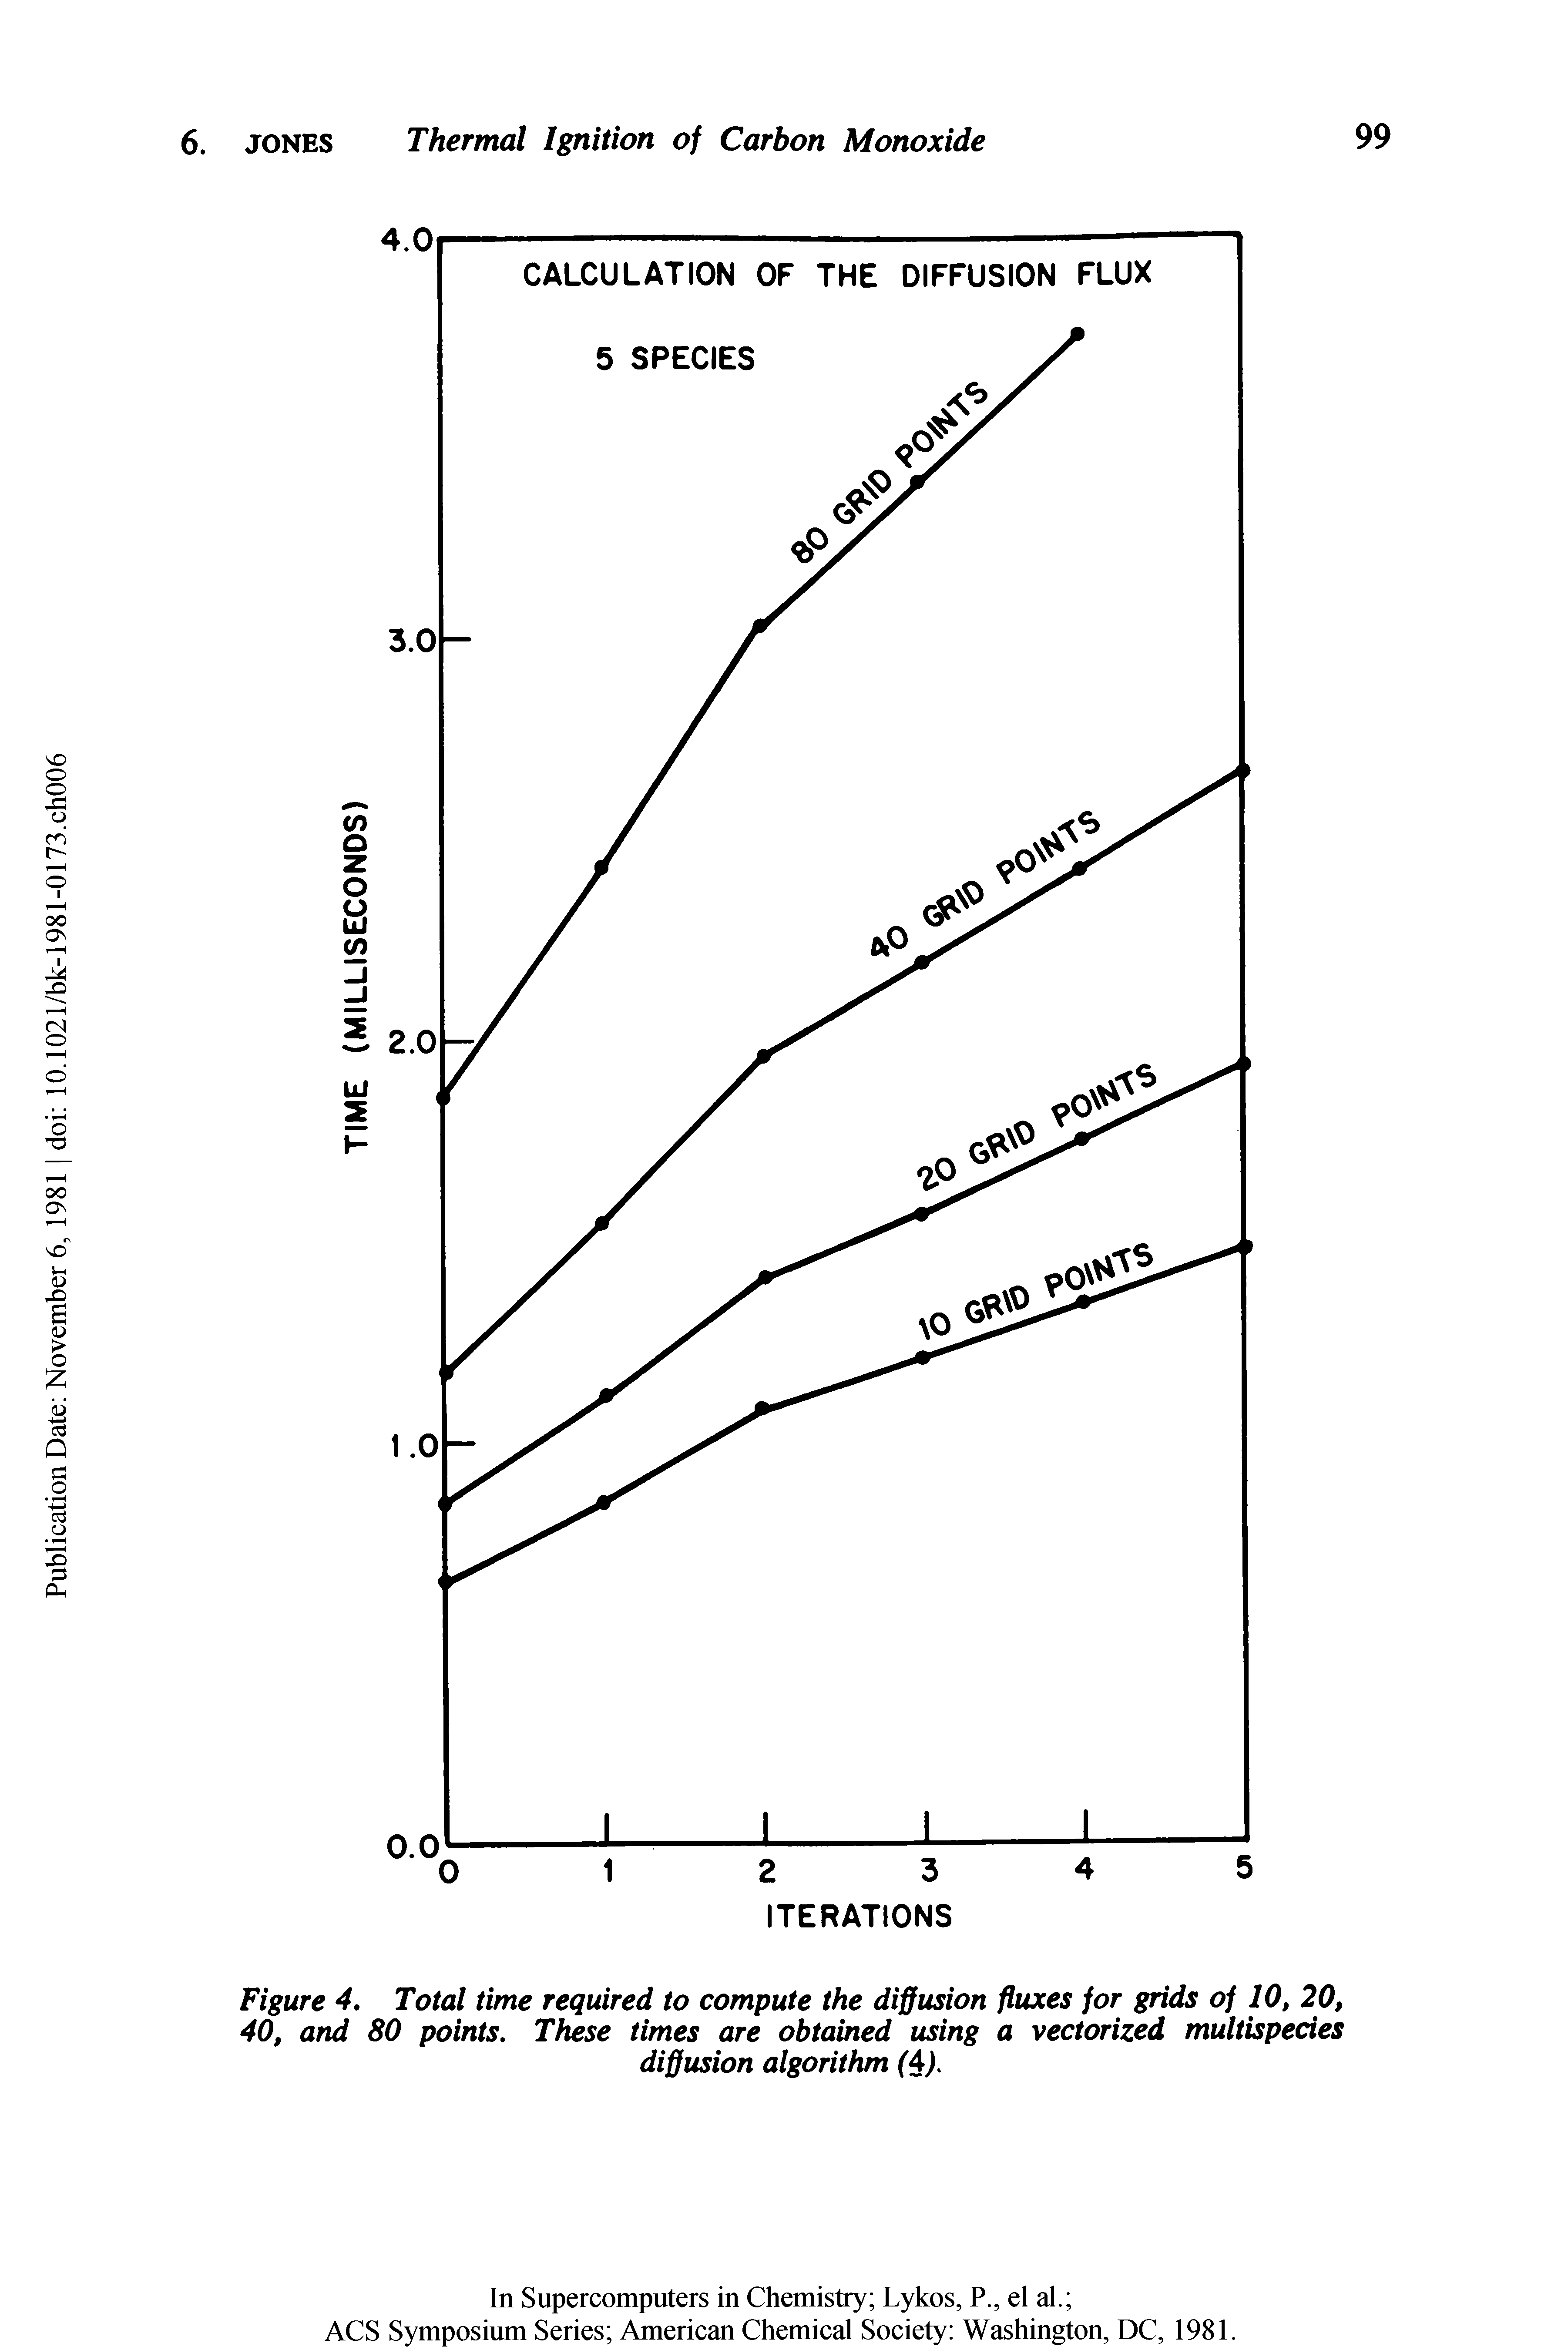 Figure 4. Total time required to compute the diffusion fluxes for grids of 10, 20, 40, and 80 points. These times are obtained using a vectorized multispecies...